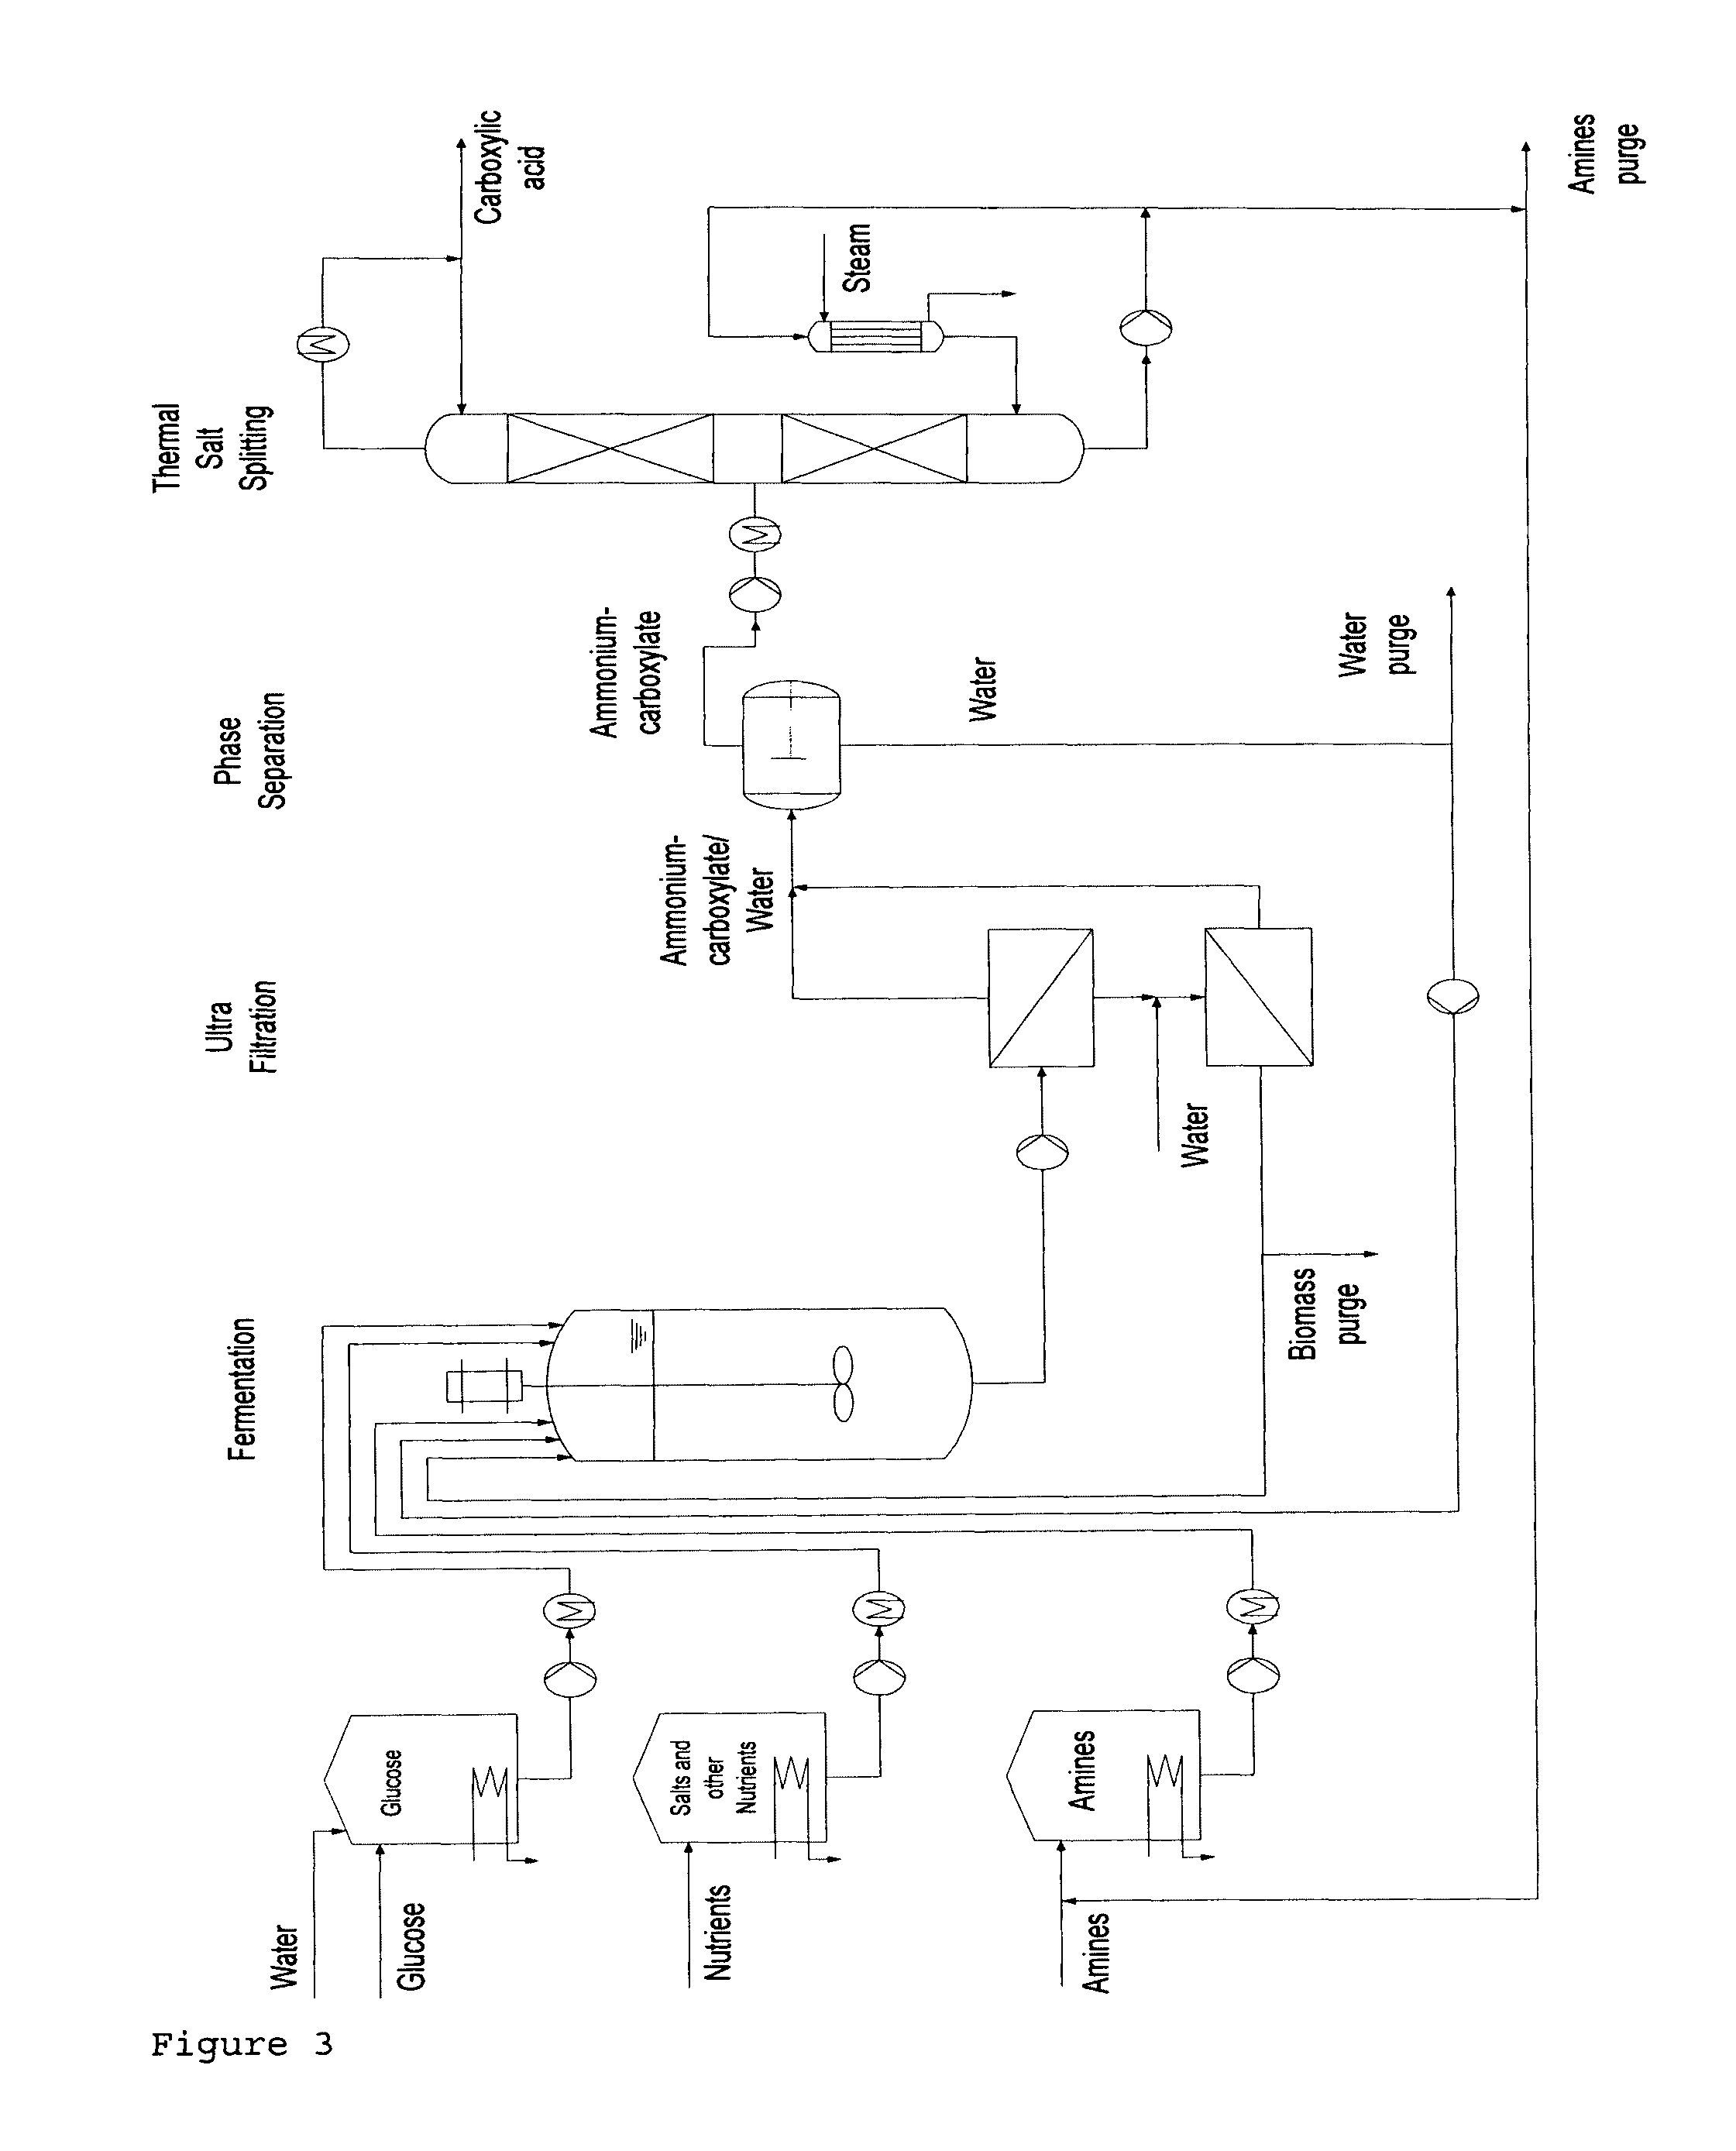 Method for the production of free carboxylic acids